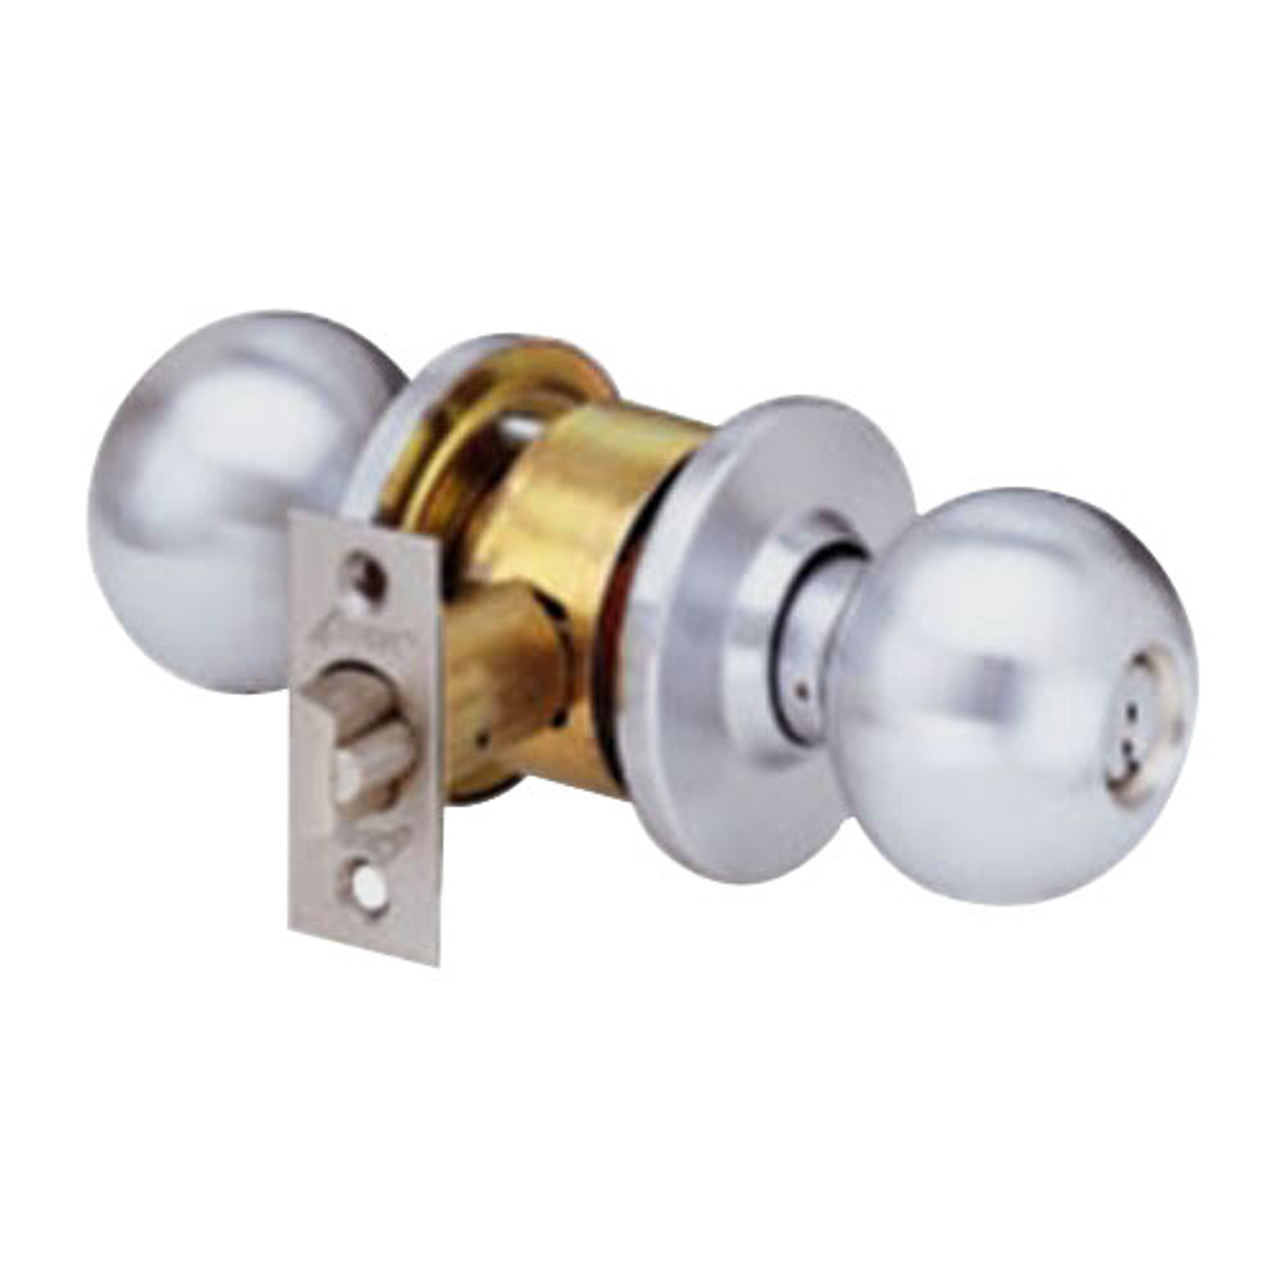 MK14-BD-26D Arrow Lock MK Series Cylindrical Locksets Single Cylinder for Service Station with BD Knob in Satin Chromium Finish